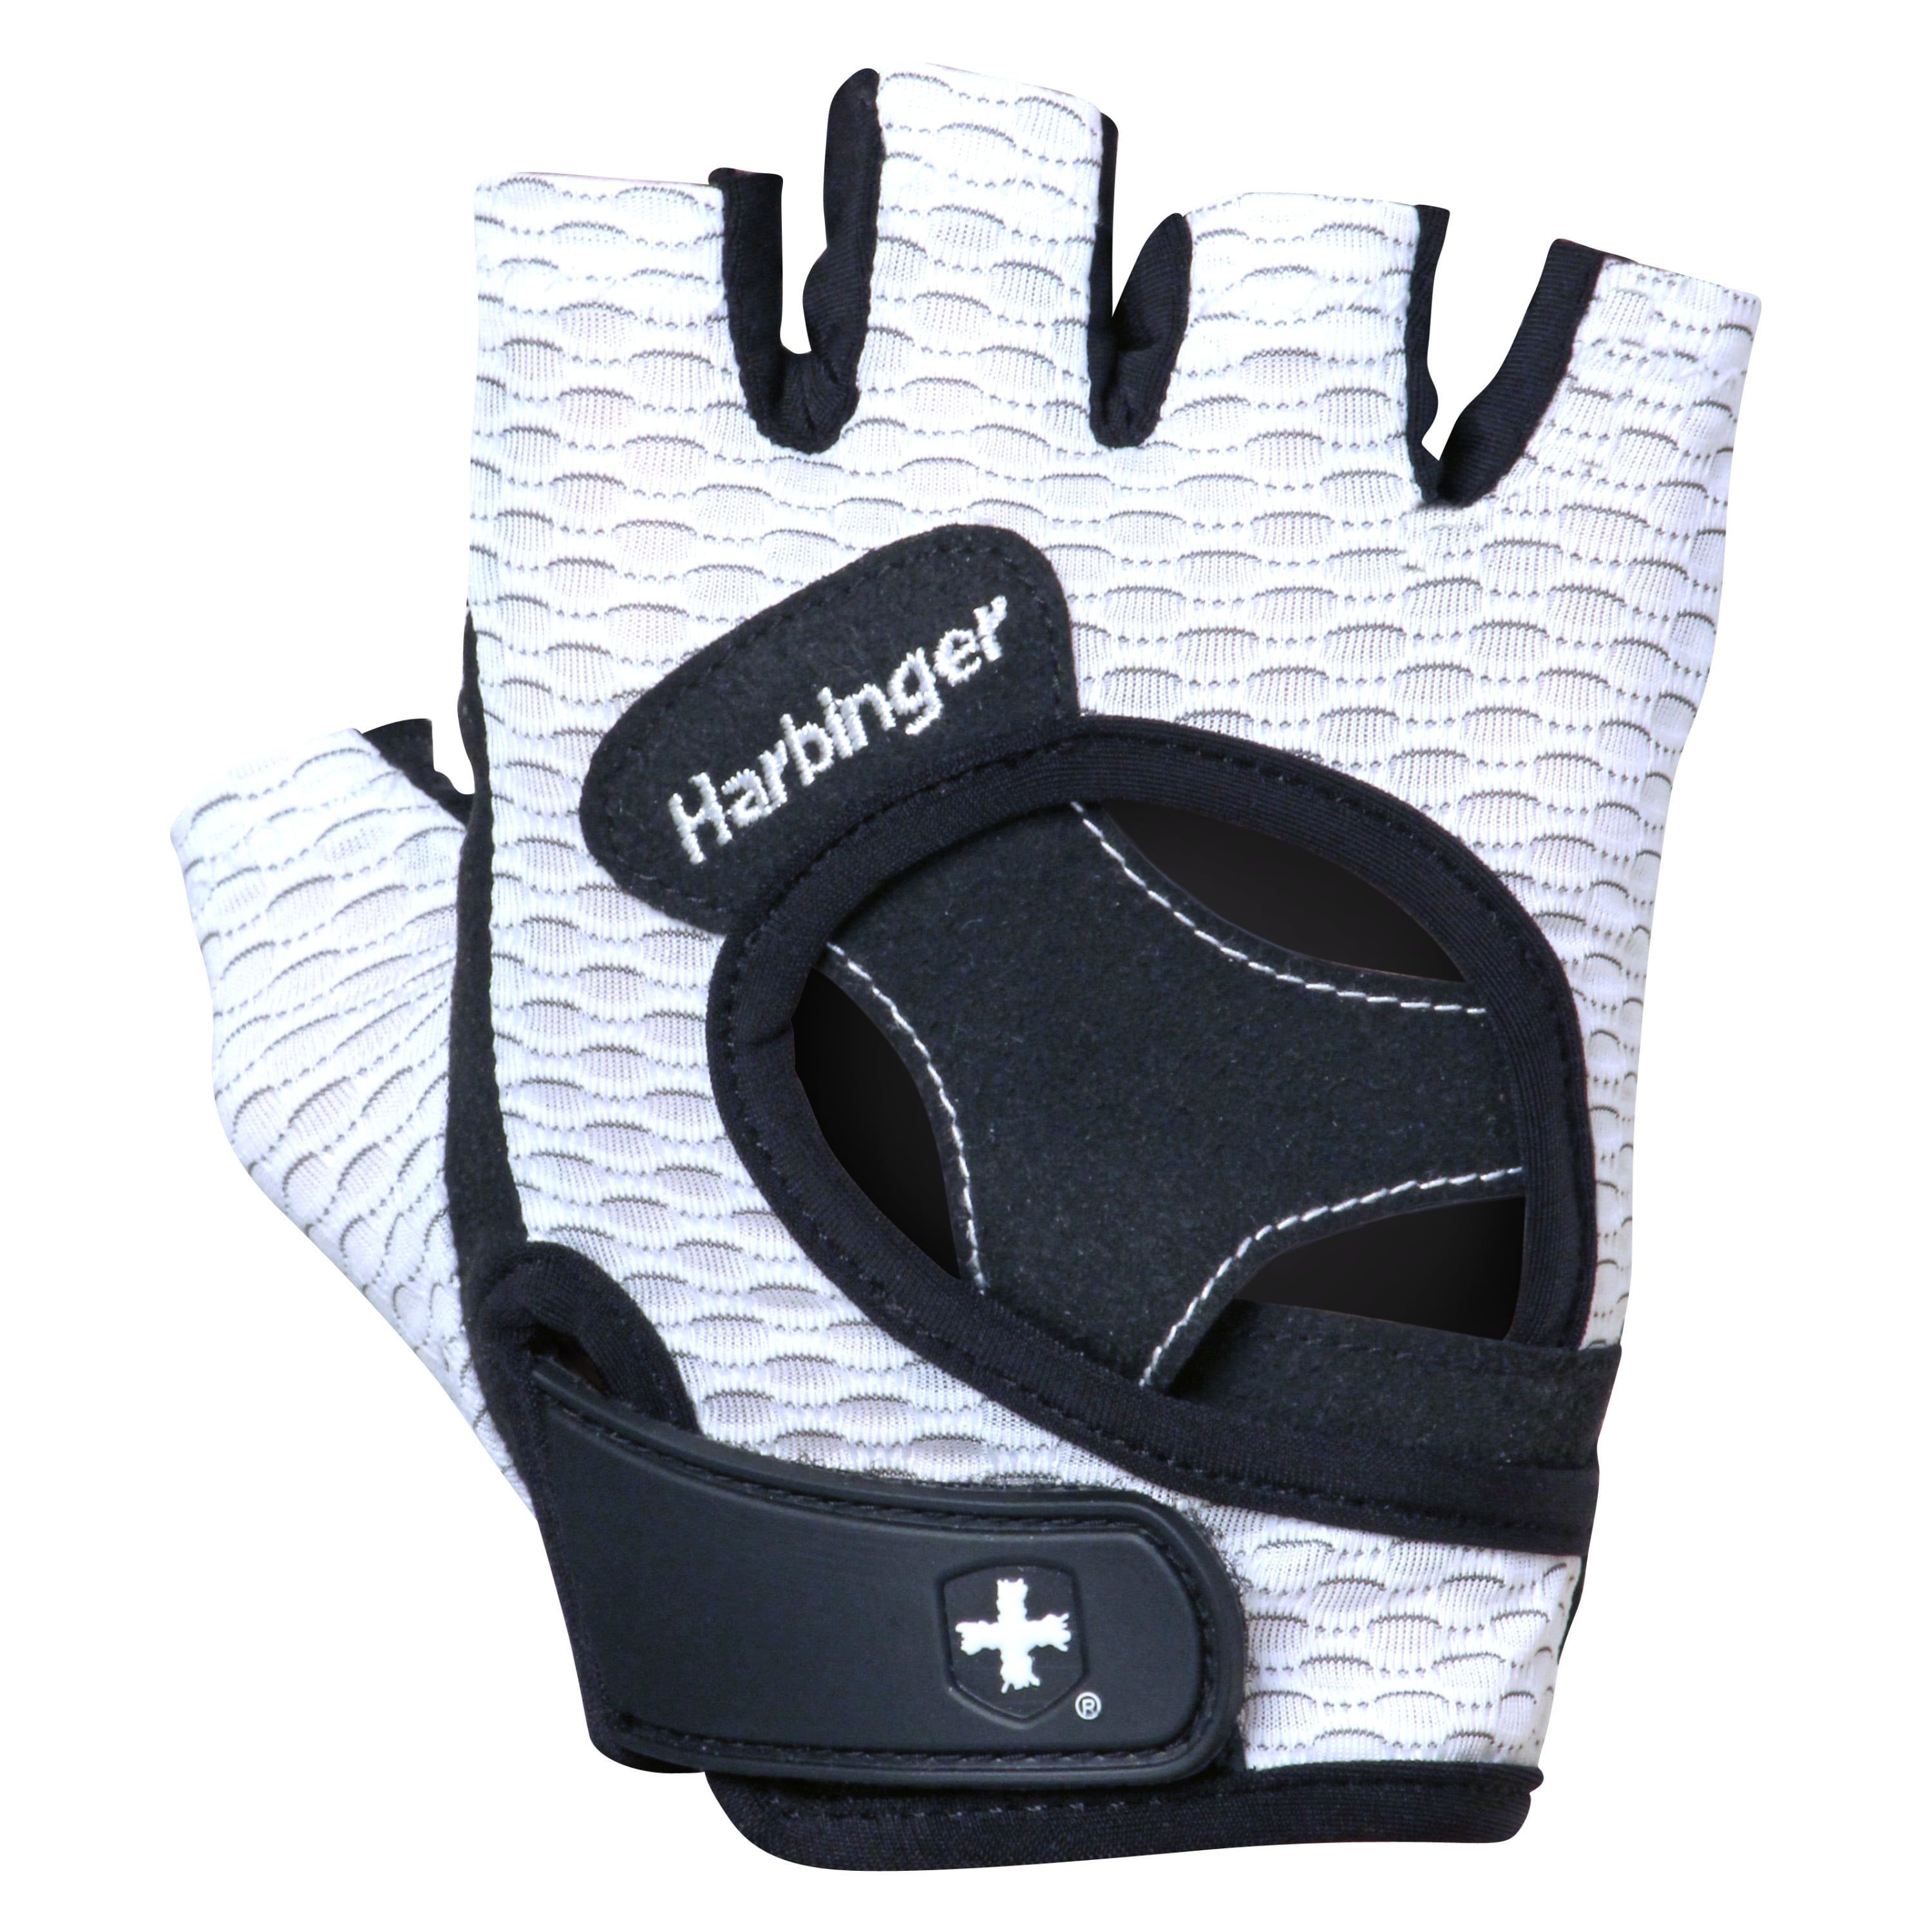 2017 Model Harbinger Womens Flexfit Wash and Dry Weightlifting Gloves with Padded Leather Palm Pair